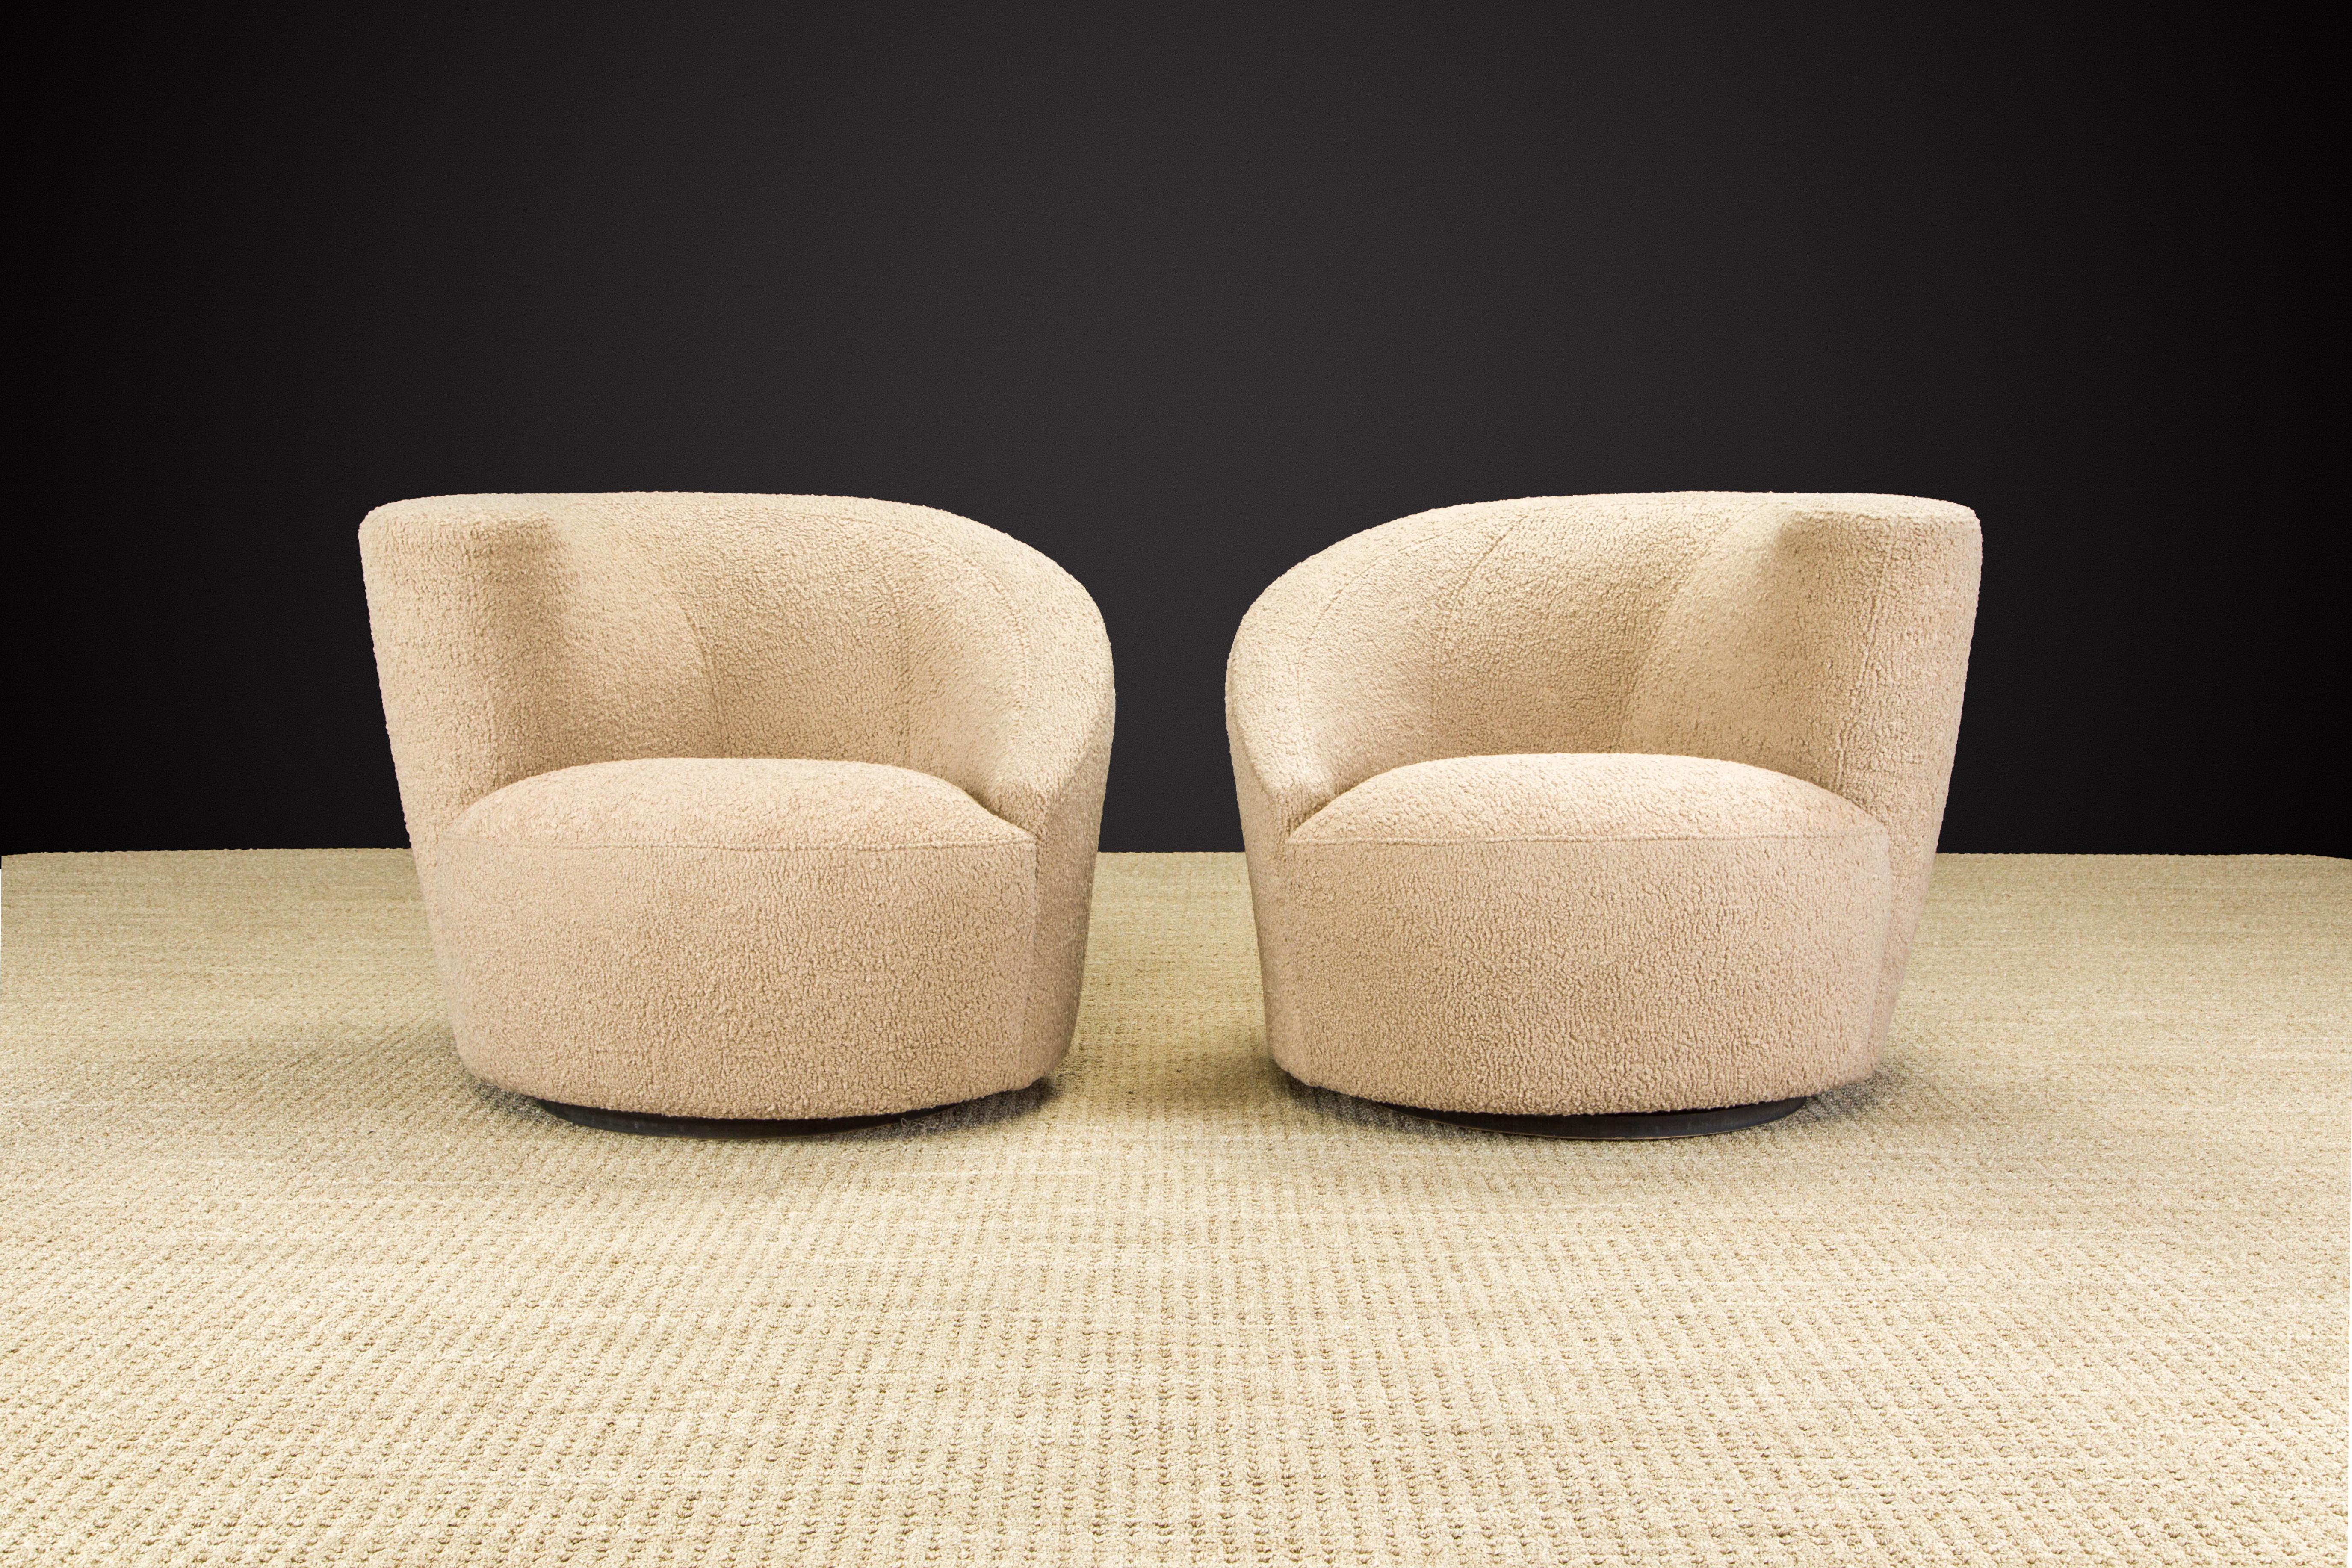 Newly reupholstered in a soft and nubby beige bouclé, this pair of 'Corkscrew' swivel chairs, also often referred to as 'Nautilus', by Vladimir Kagan for Directional, circa 1980 is signed with a Directional label underneath. These classic club